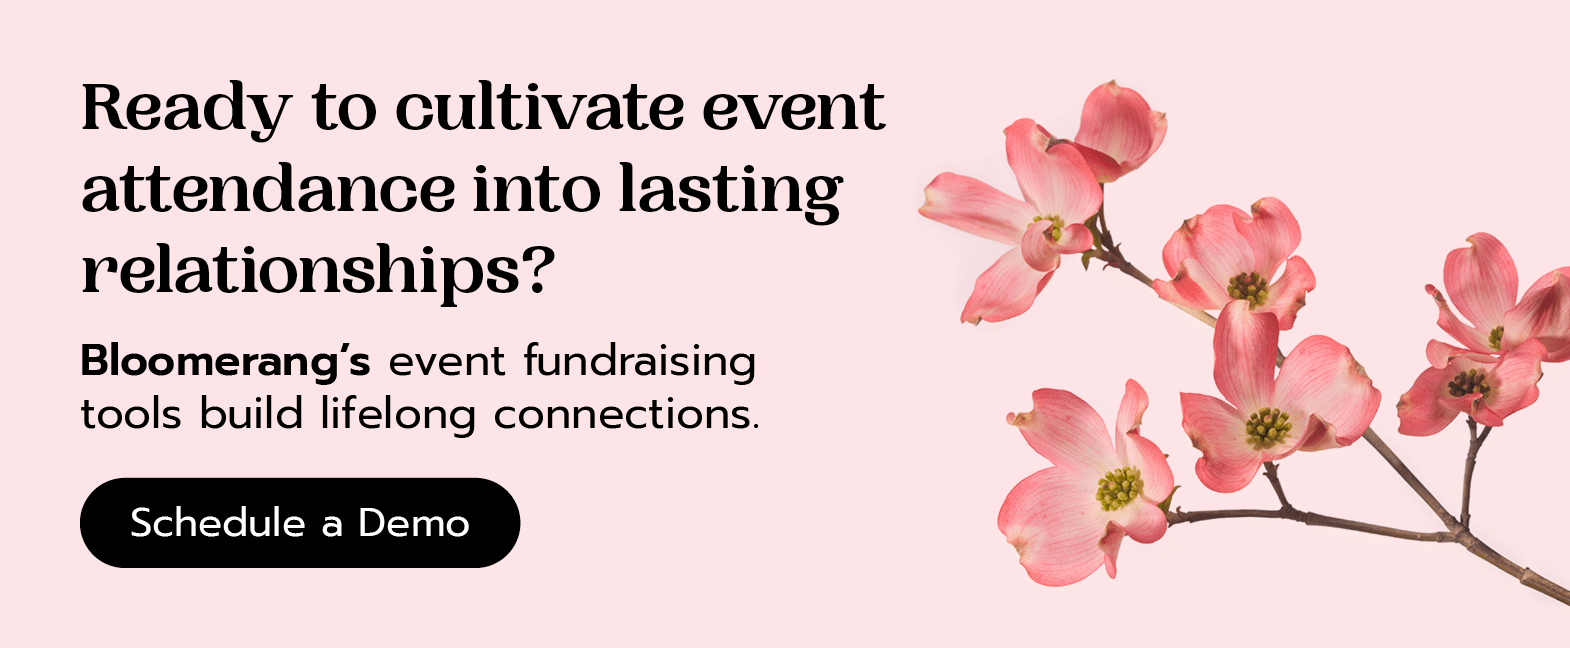 Ready to cultivate event attendance into lasting relationships? Bloomerang’s event fundraising tools build lifelong connections. Schedule a Demo here. 